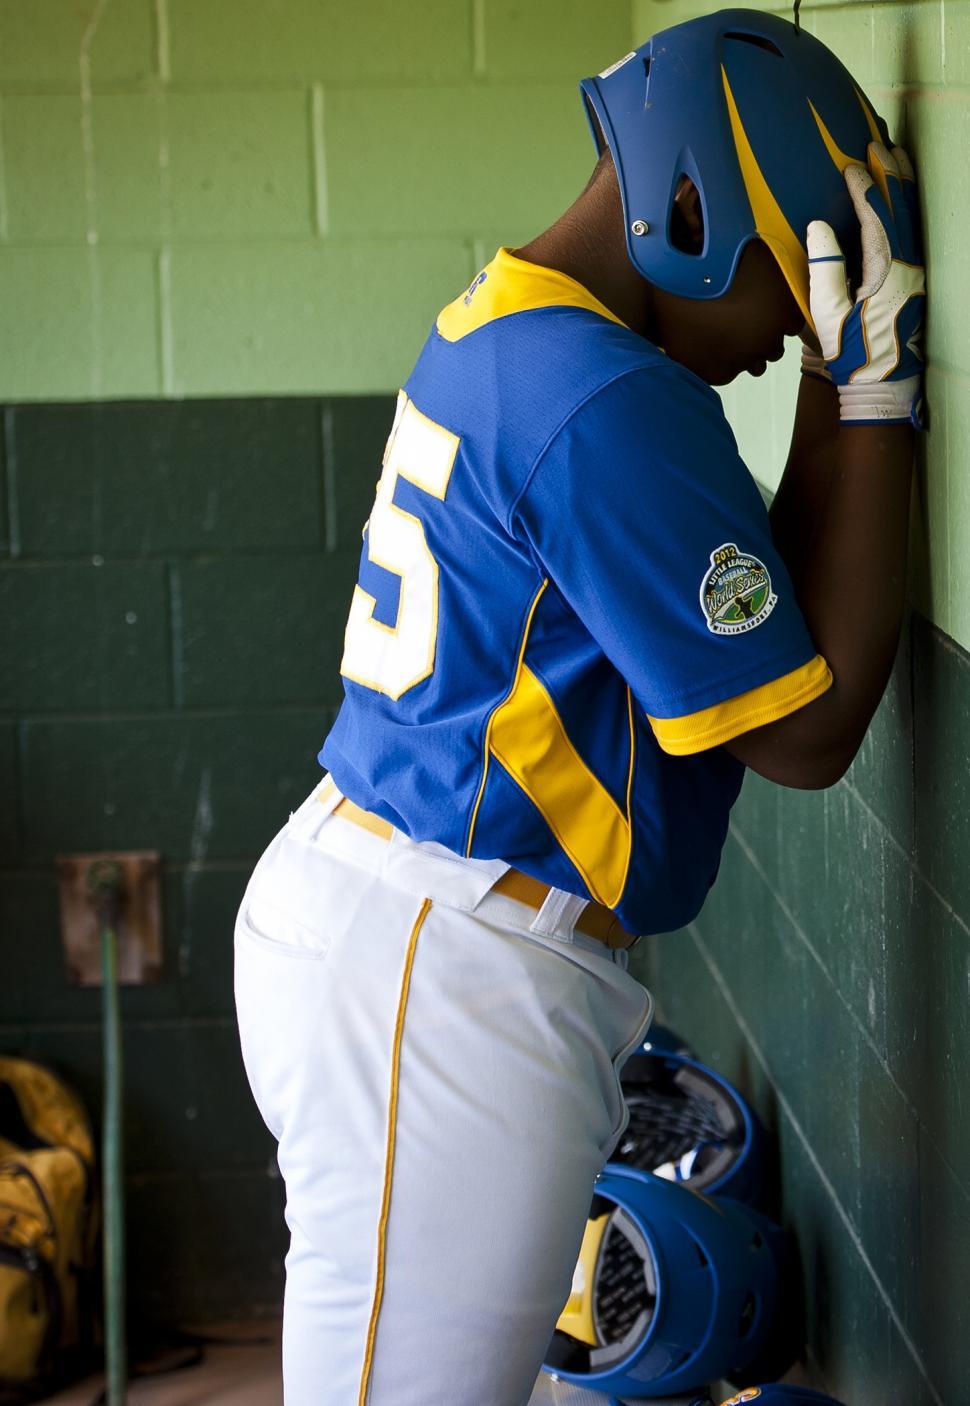 Free Image of Baseball Player Leaning Against Wall in Dugout 